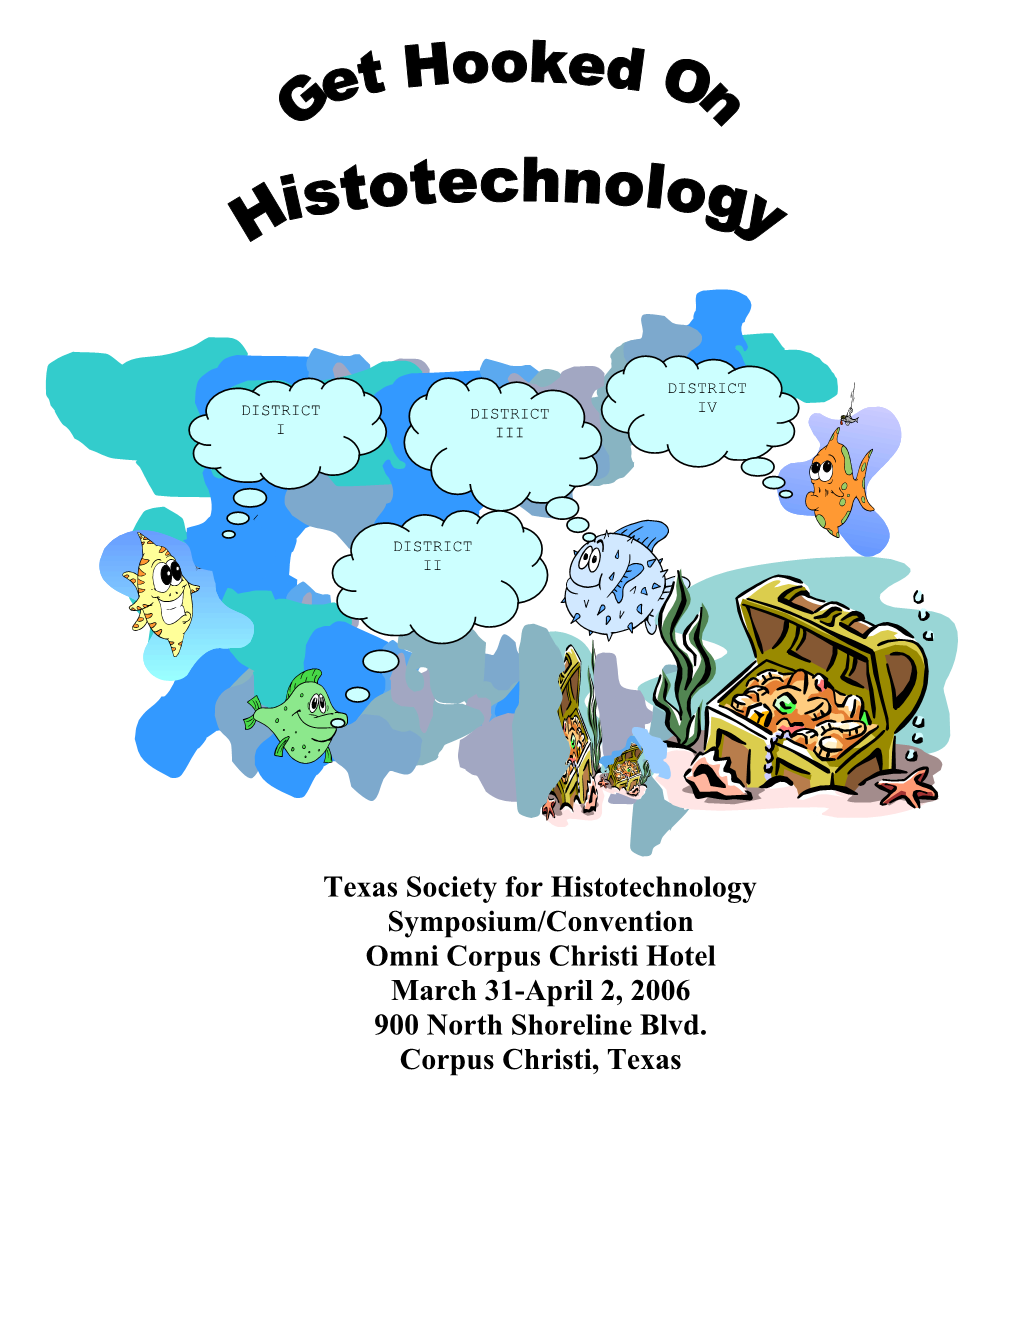 Texas Society for Histotechnology Symposium/Convention